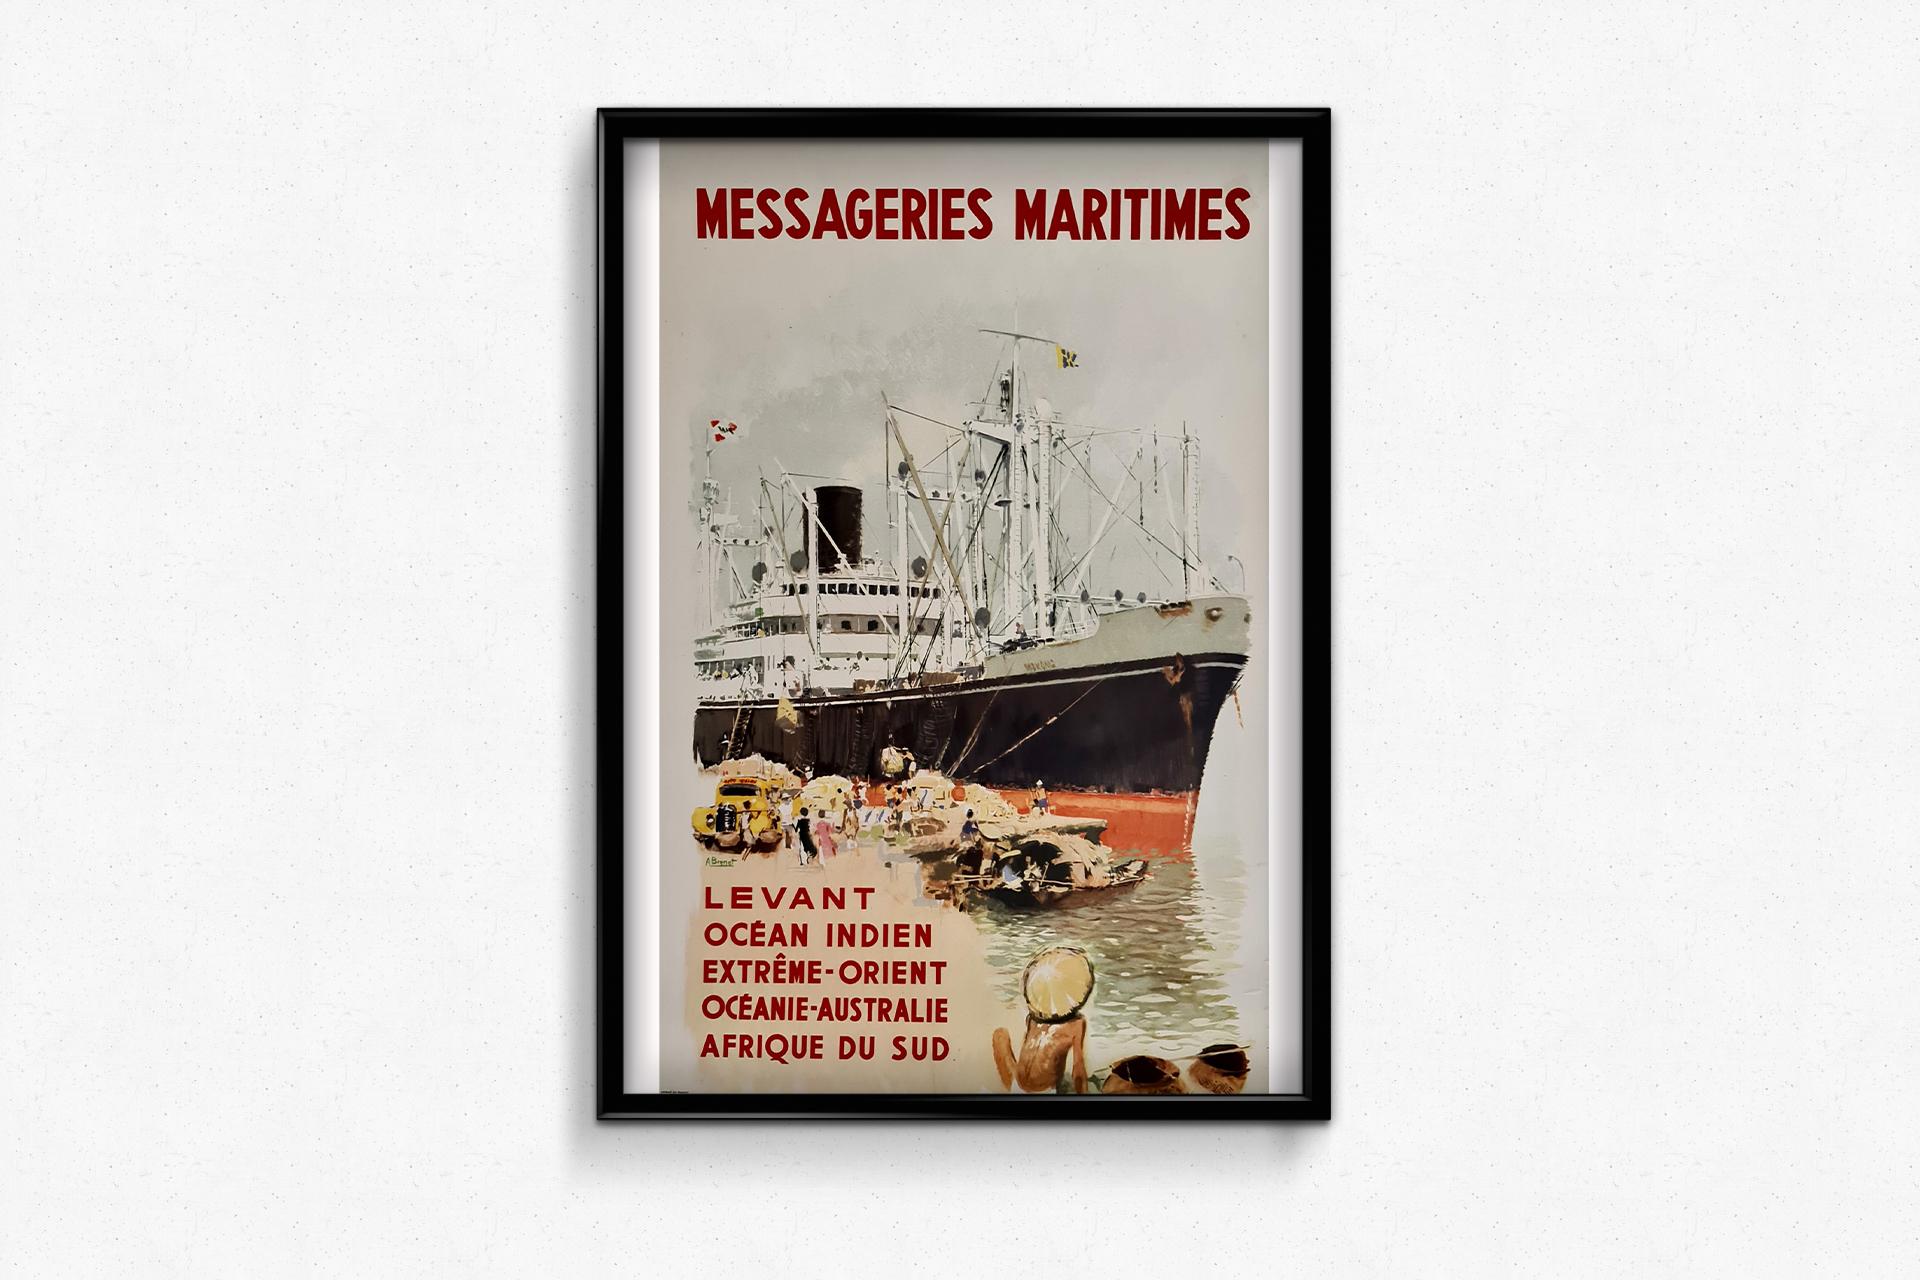 A majestic poster made around the 1950s by Albert Brenet 🇫🇷 (1903-2005), a famous French painter, poster artist, sculptor and illustrator.

He was notably appointed official painter of the French Navy in 1936.

All his life he will not stop